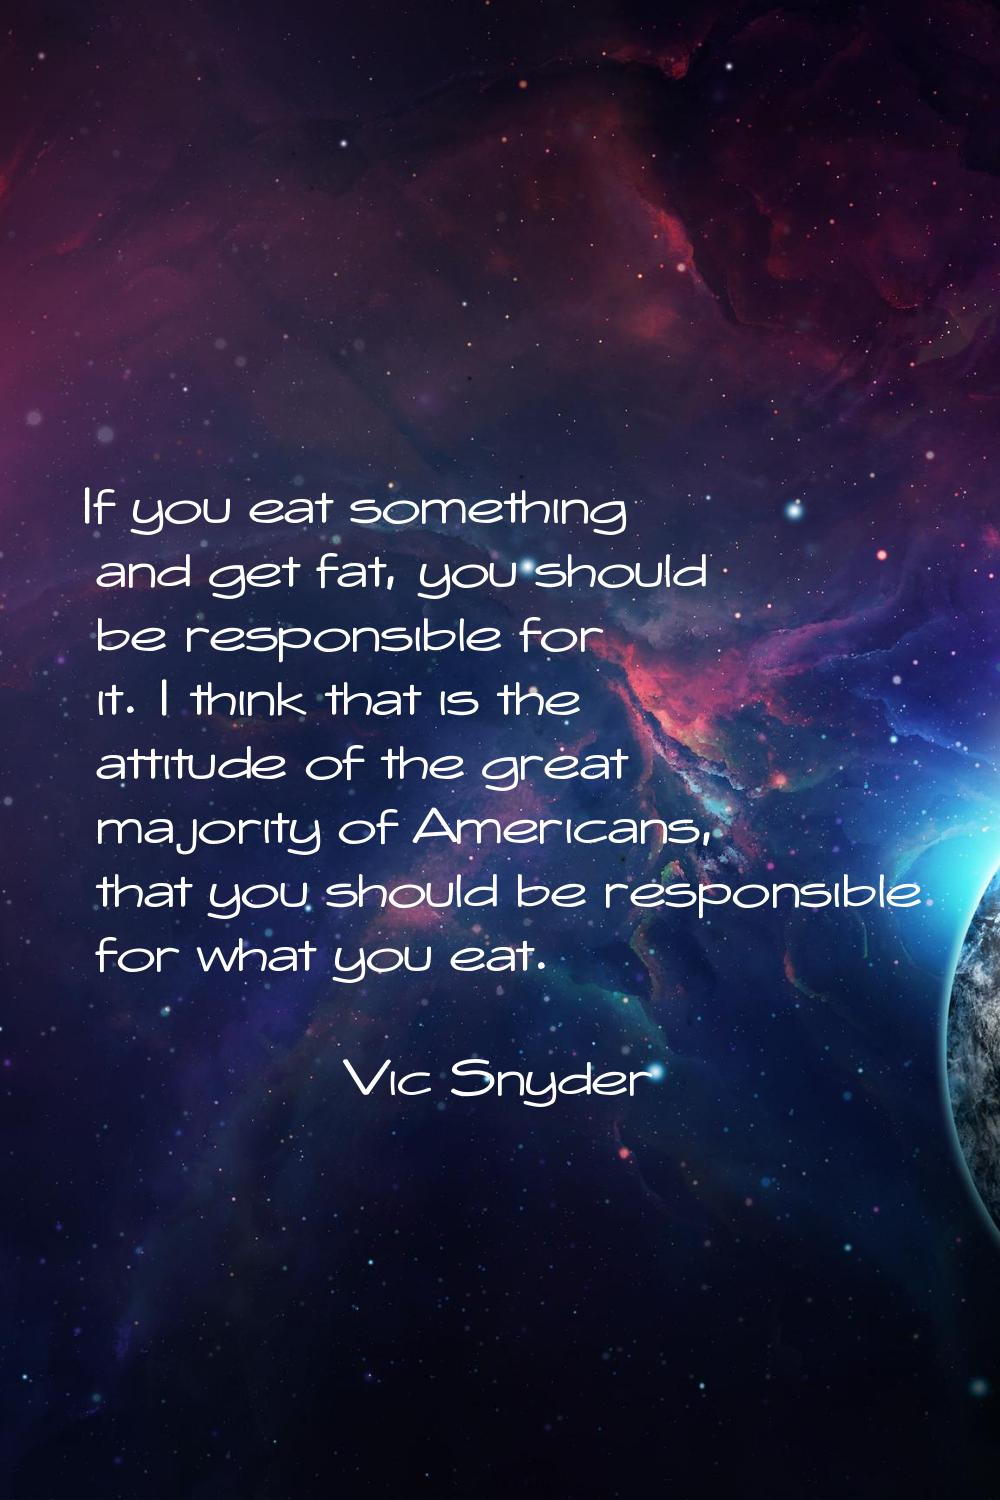 If you eat something and get fat, you should be responsible for it. I think that is the attitude of